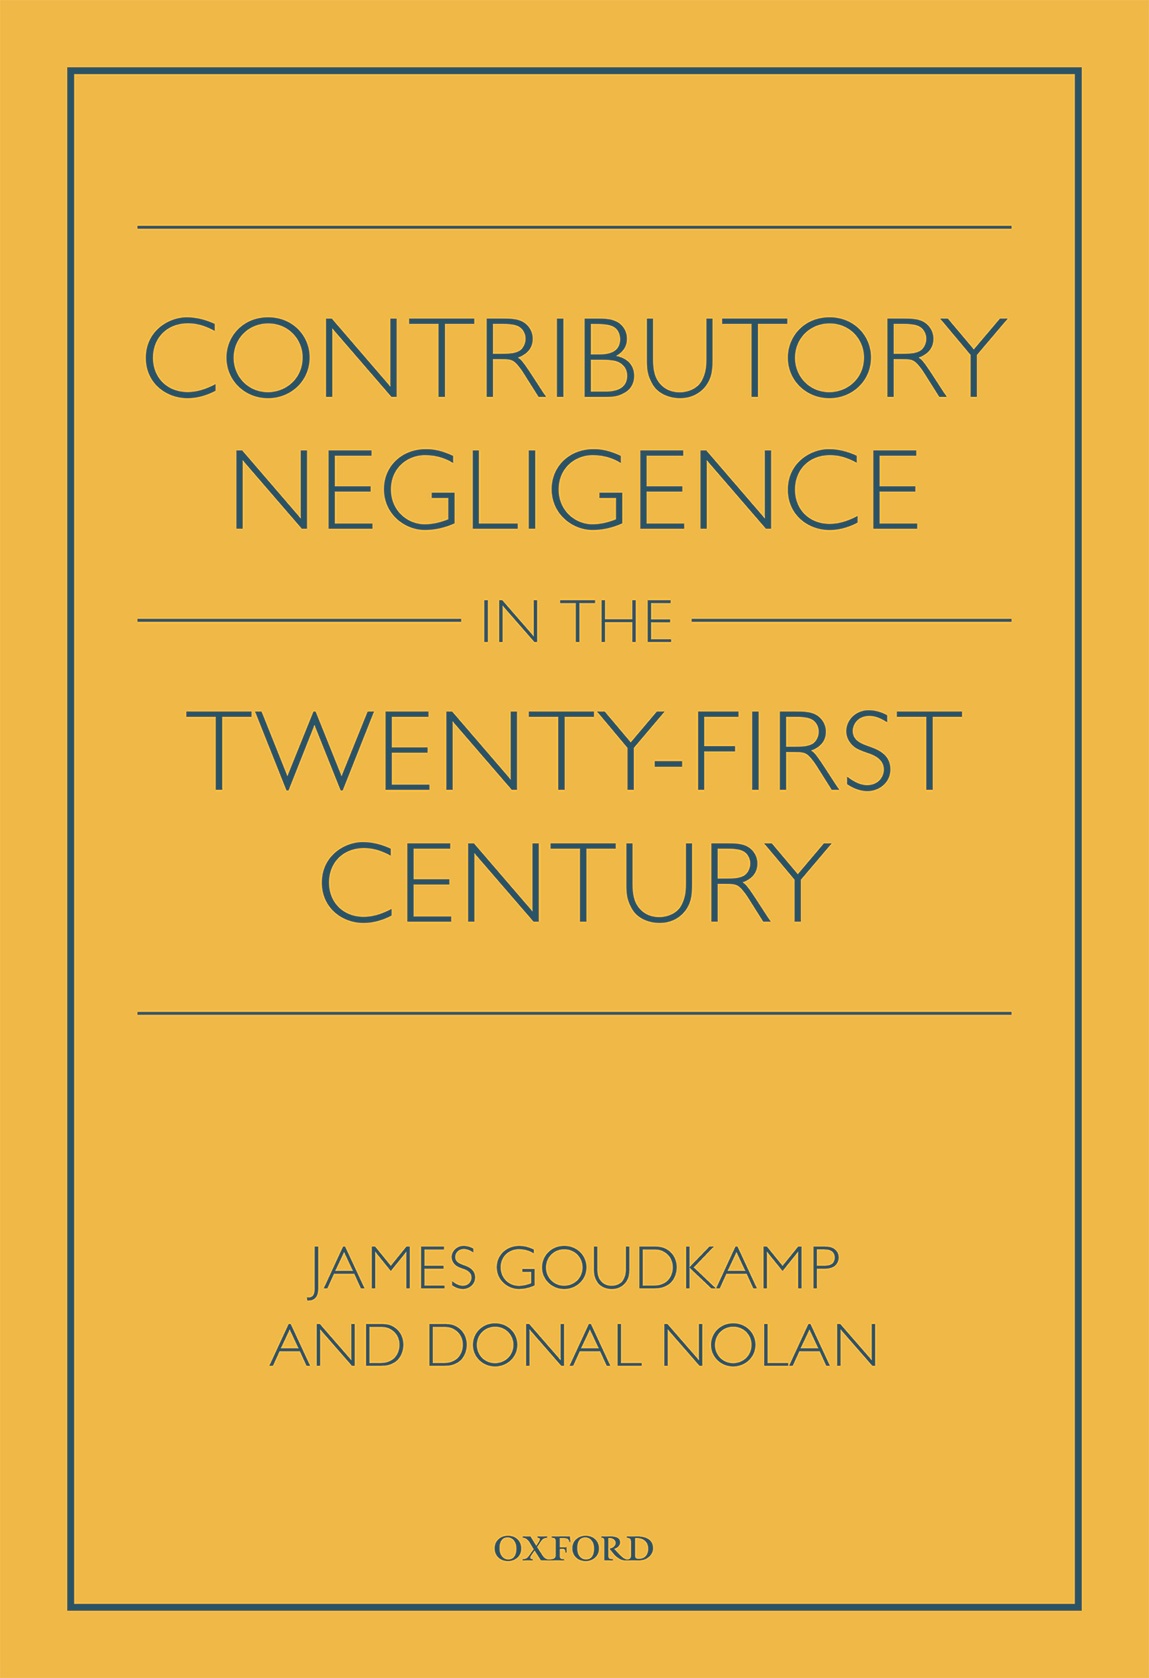 Contributory Negligence in 21st Century book cover